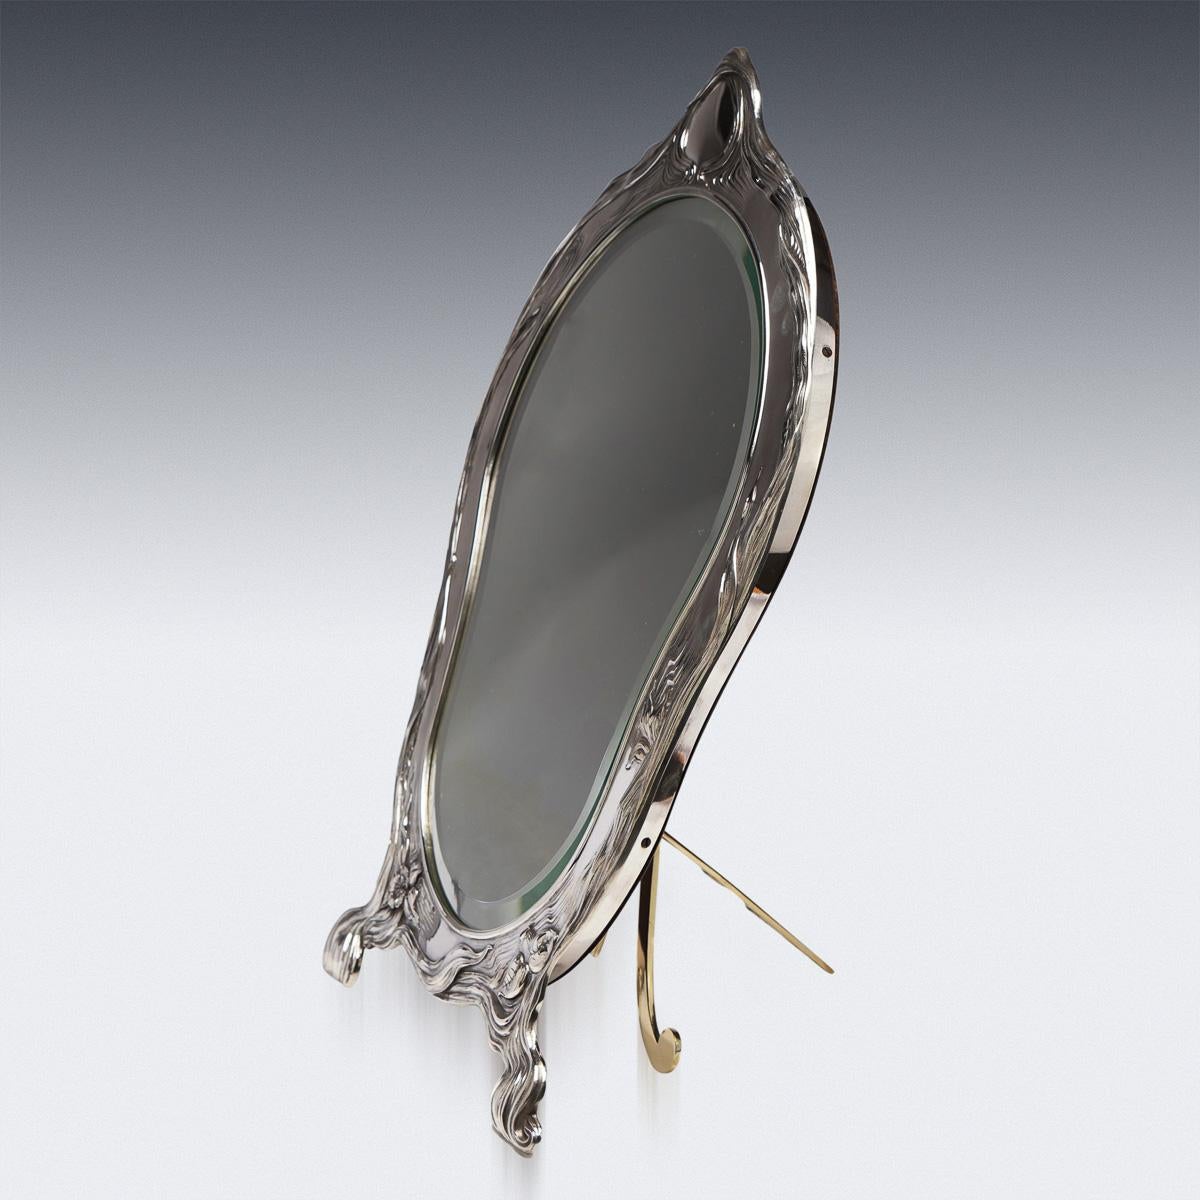 Antique early-20th Century Russian Art Nouveau solid silver large table mirror, delicately decorated with flowing flowers and foliage, vacant cartouche above. The mirror is mahogany backed and resting on an adjustable strut. Hallmarked Russian